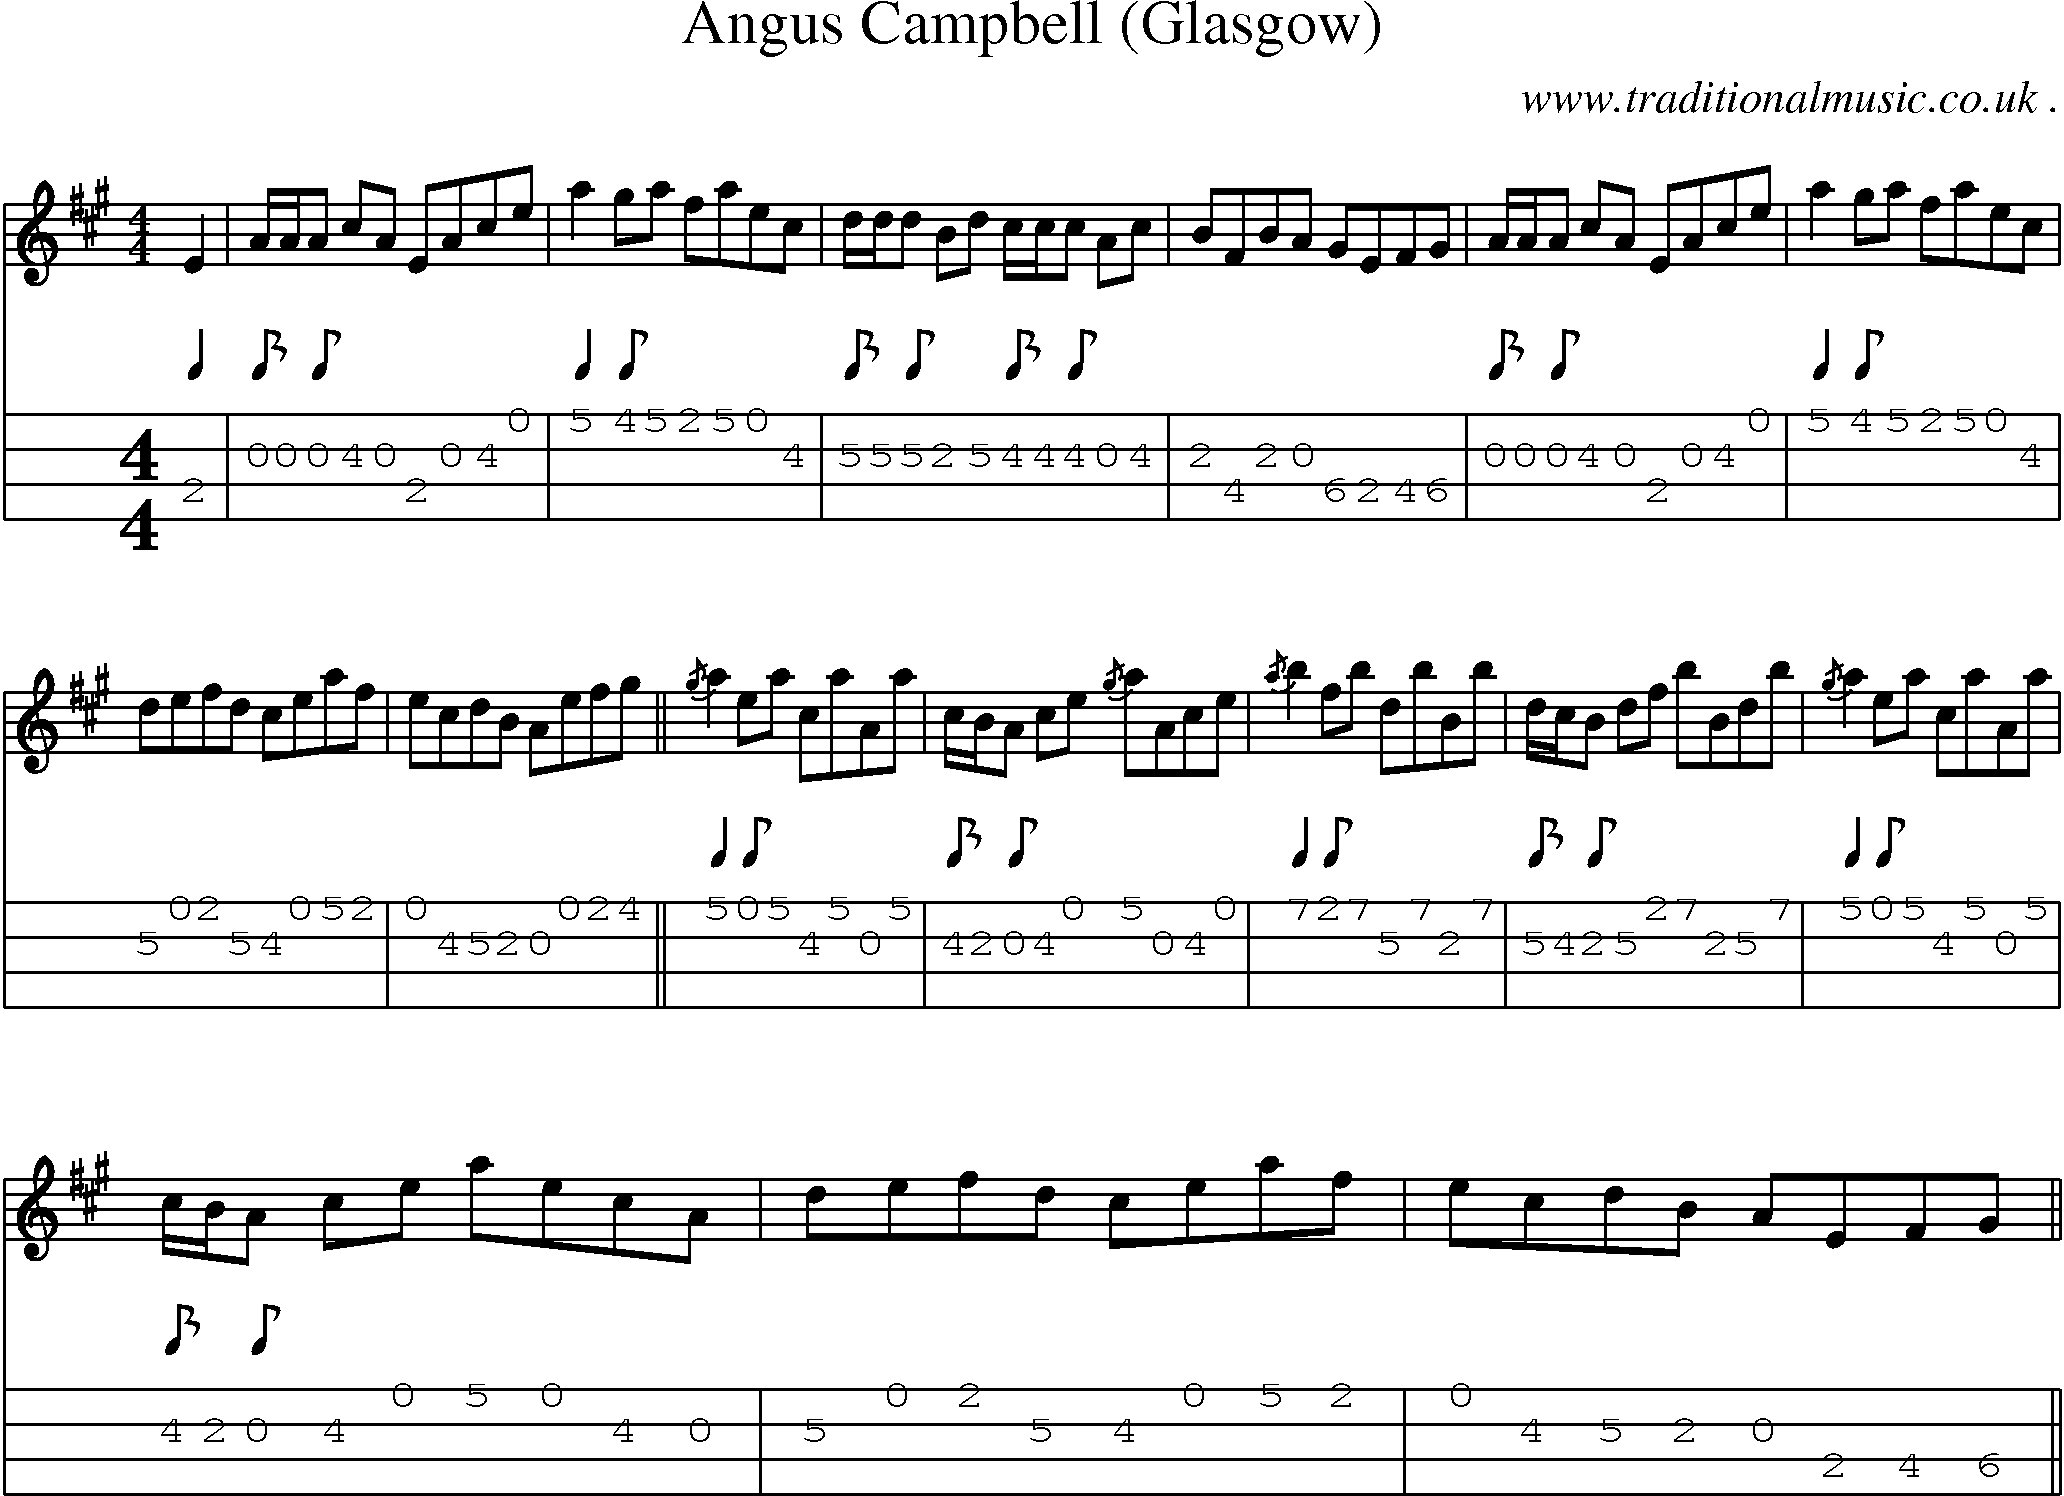 Sheet-music  score, Chords and Mandolin Tabs for Angus Campbell Glasgow